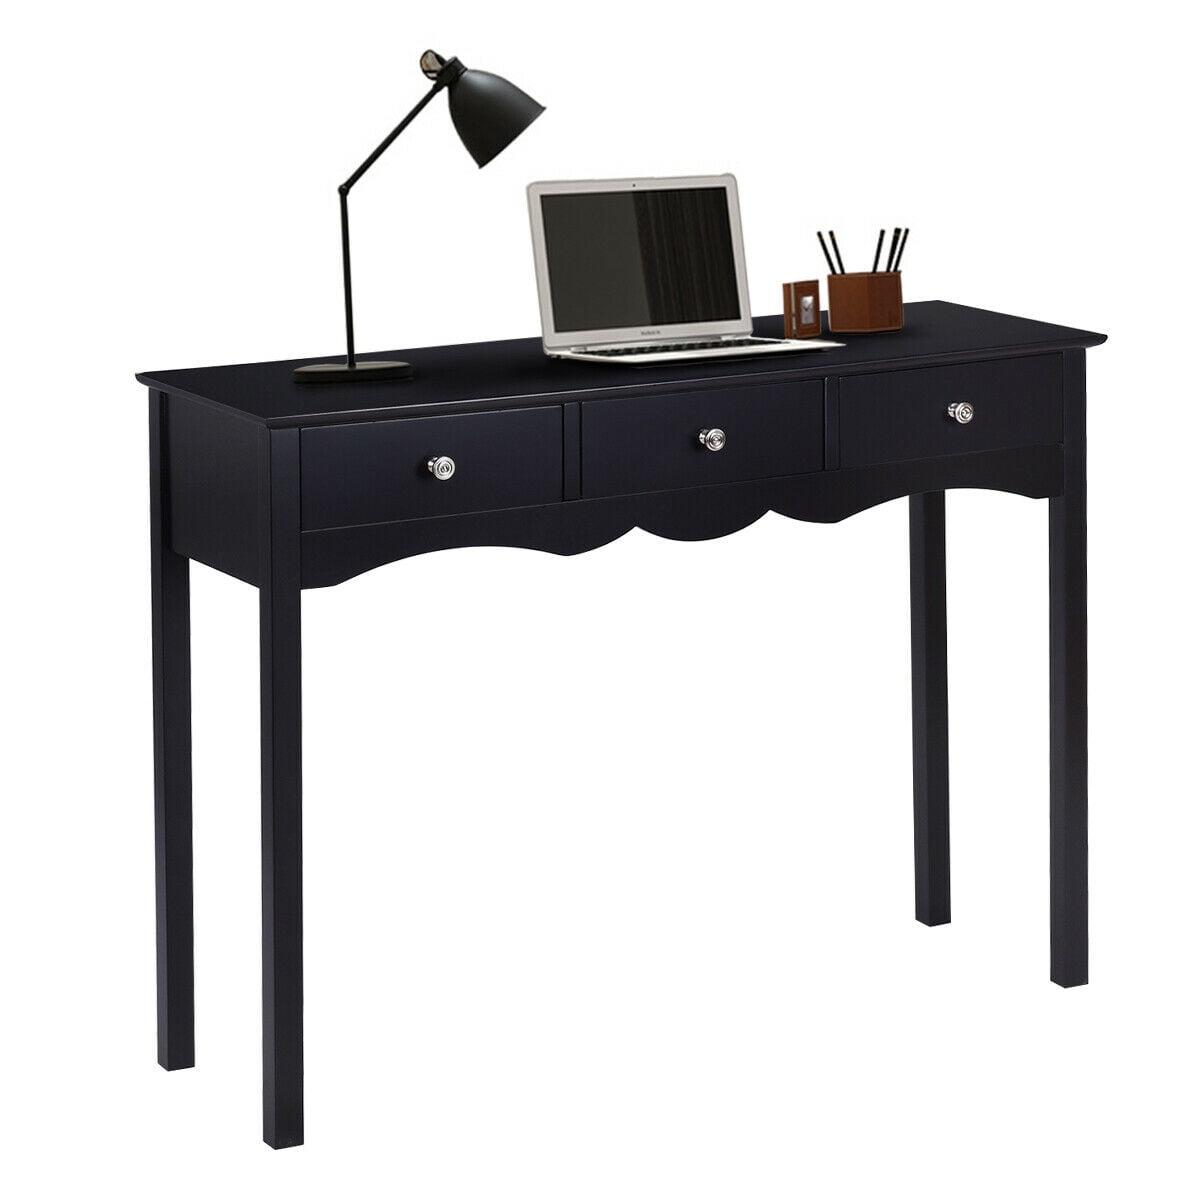 Elegant Black MDF Console Table with 3 Storage Drawers